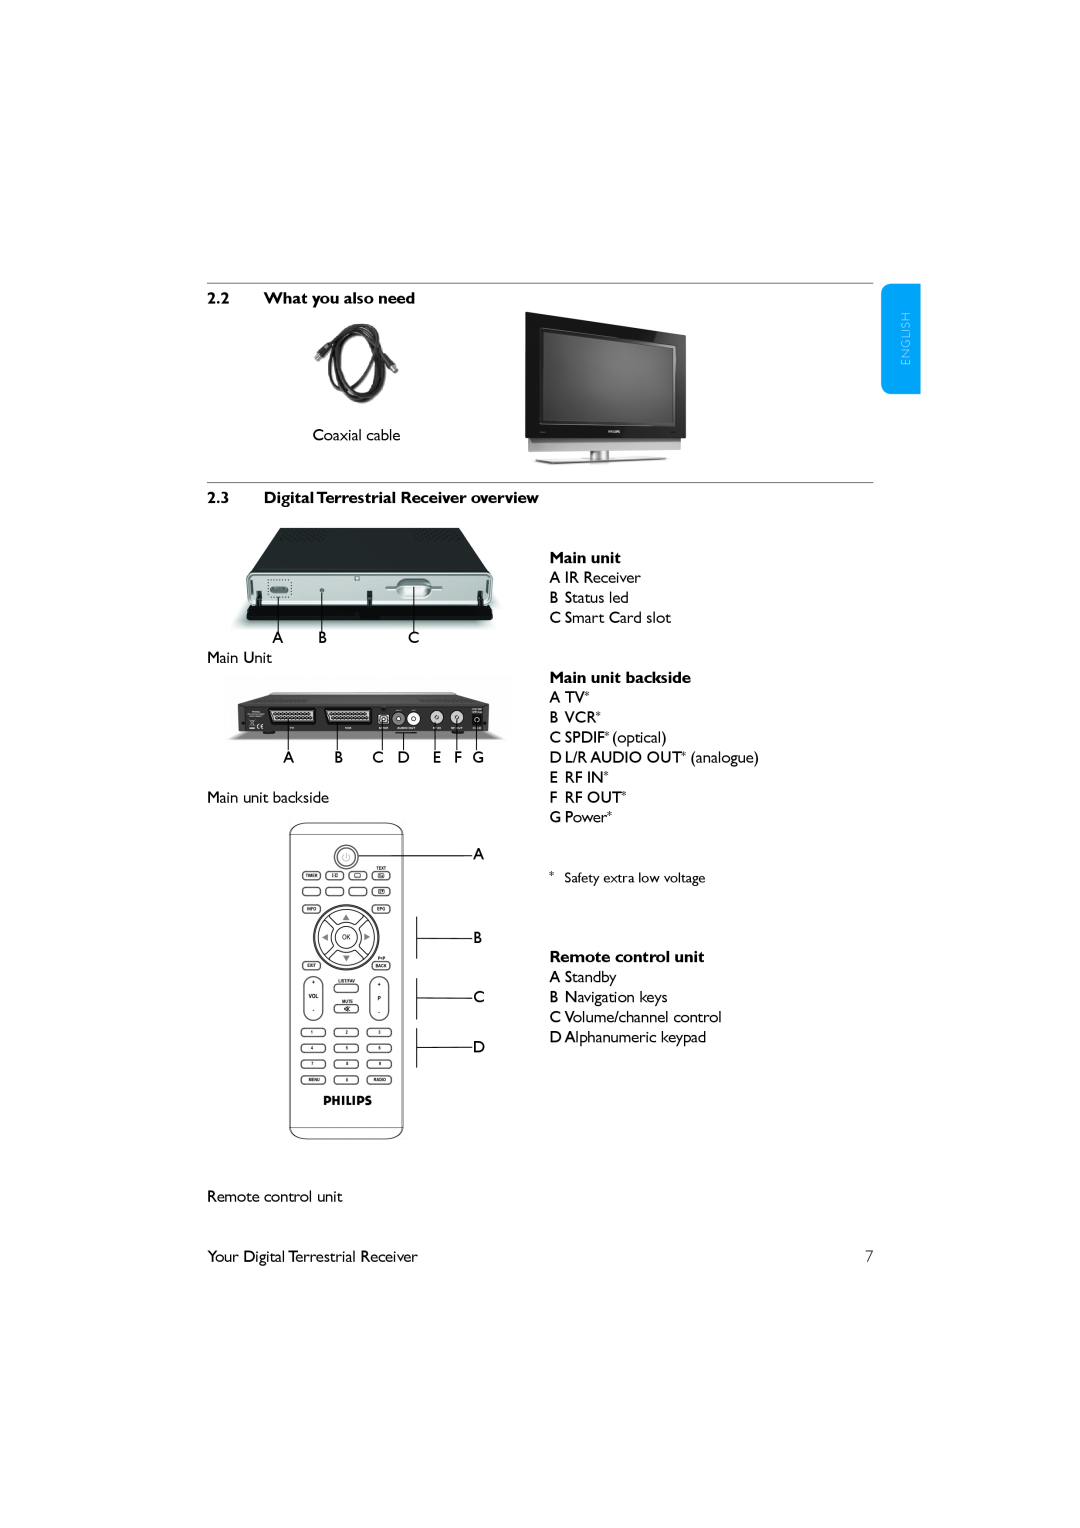 Philips DTR 2530 Digital Terrestrial Receiver overview, Main unit backside, Remote control unit, What you also need 